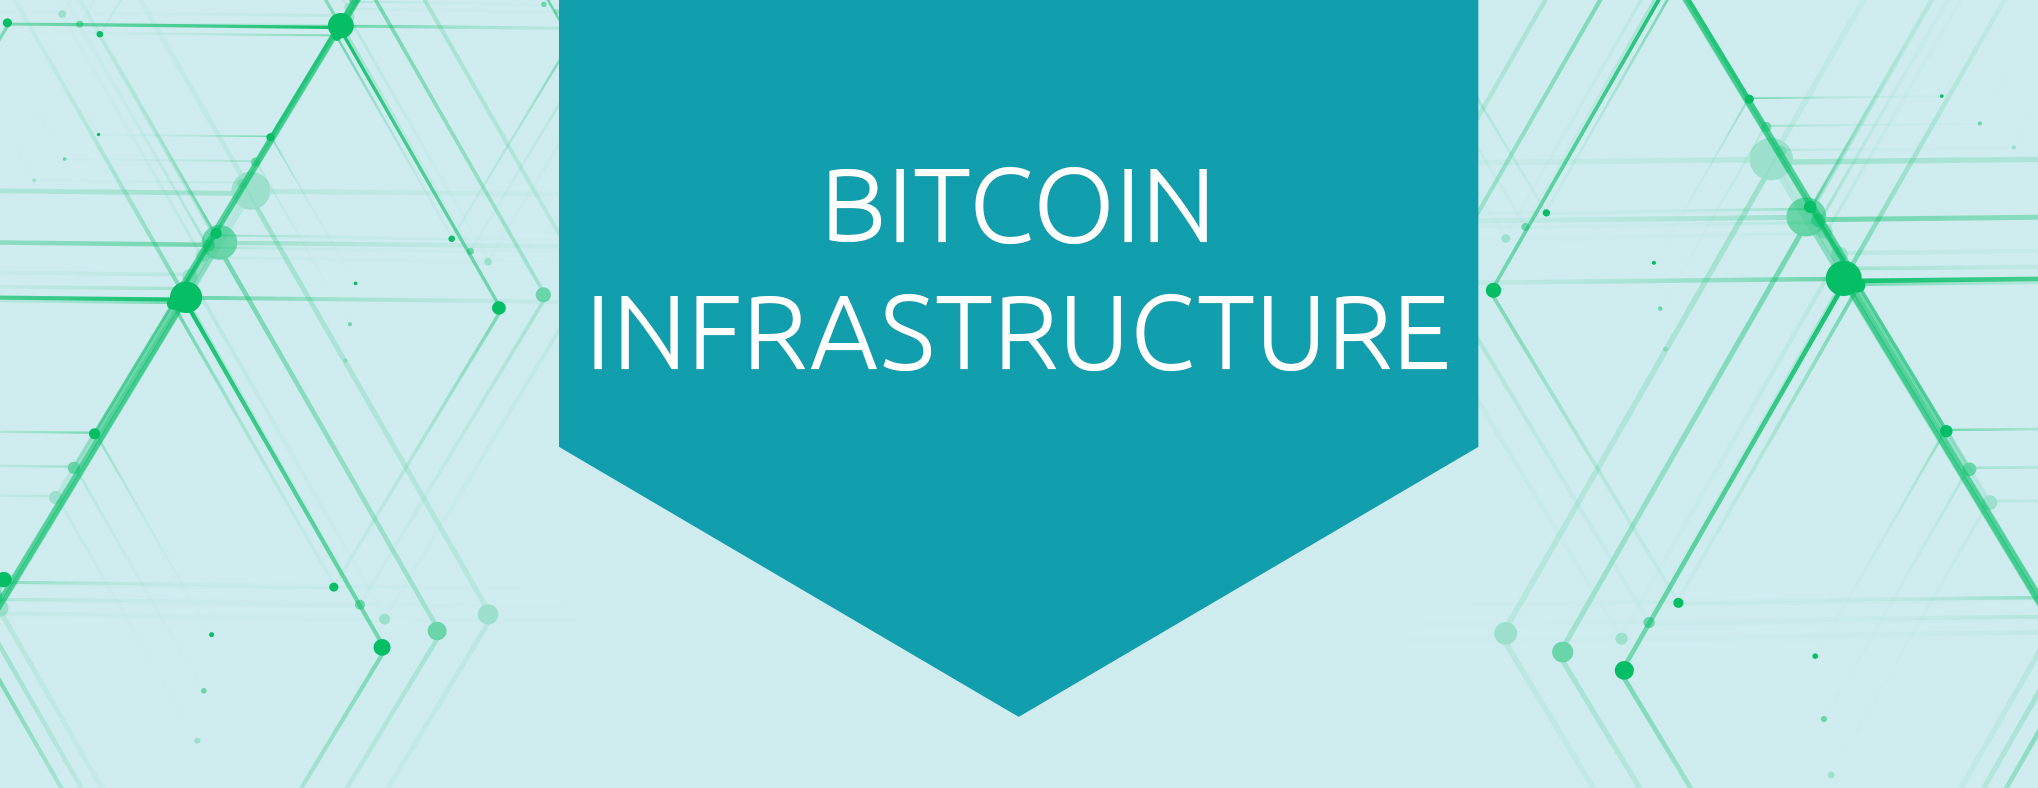 Bitcoin Infrastructure Course Certificate